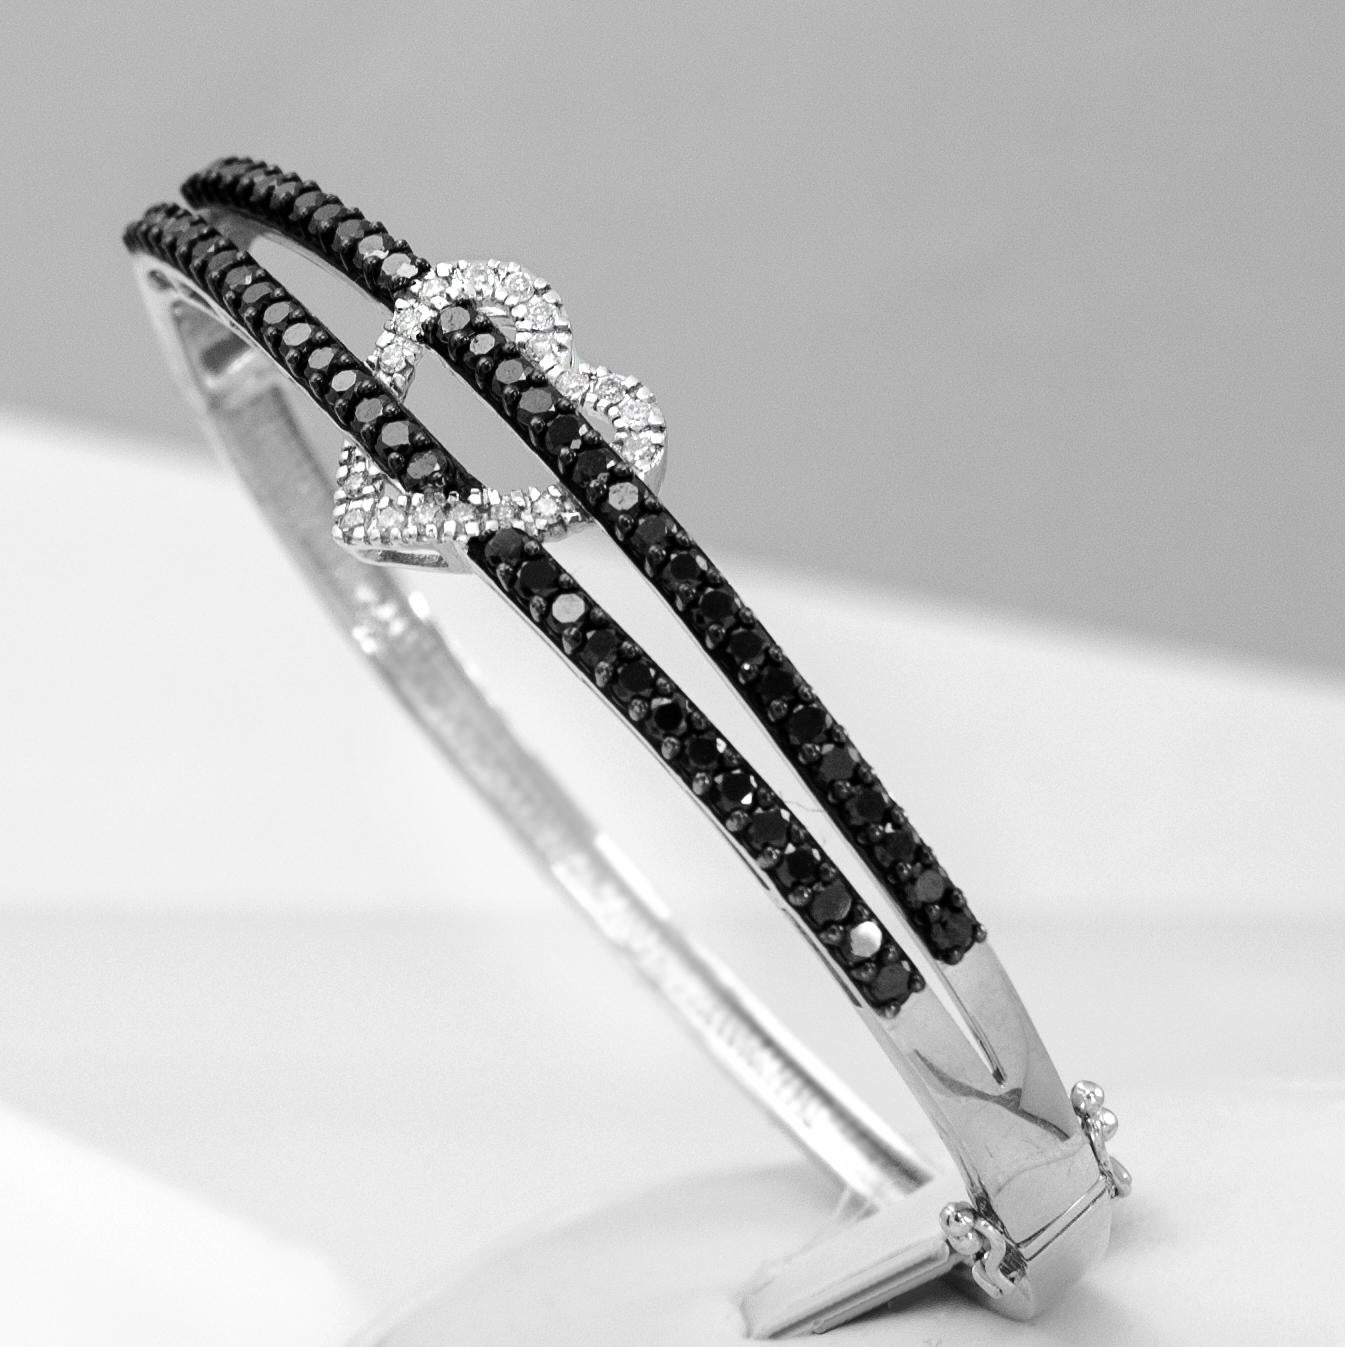 This lovely heart bangle bracelet looks fantastic everyday. Designed in sleek 14 karat white gold with 1/4 carat of white diamonds and 2.35 carats of black diamonds. This gorgeous women's bangle is available in stock. It is in size 7.